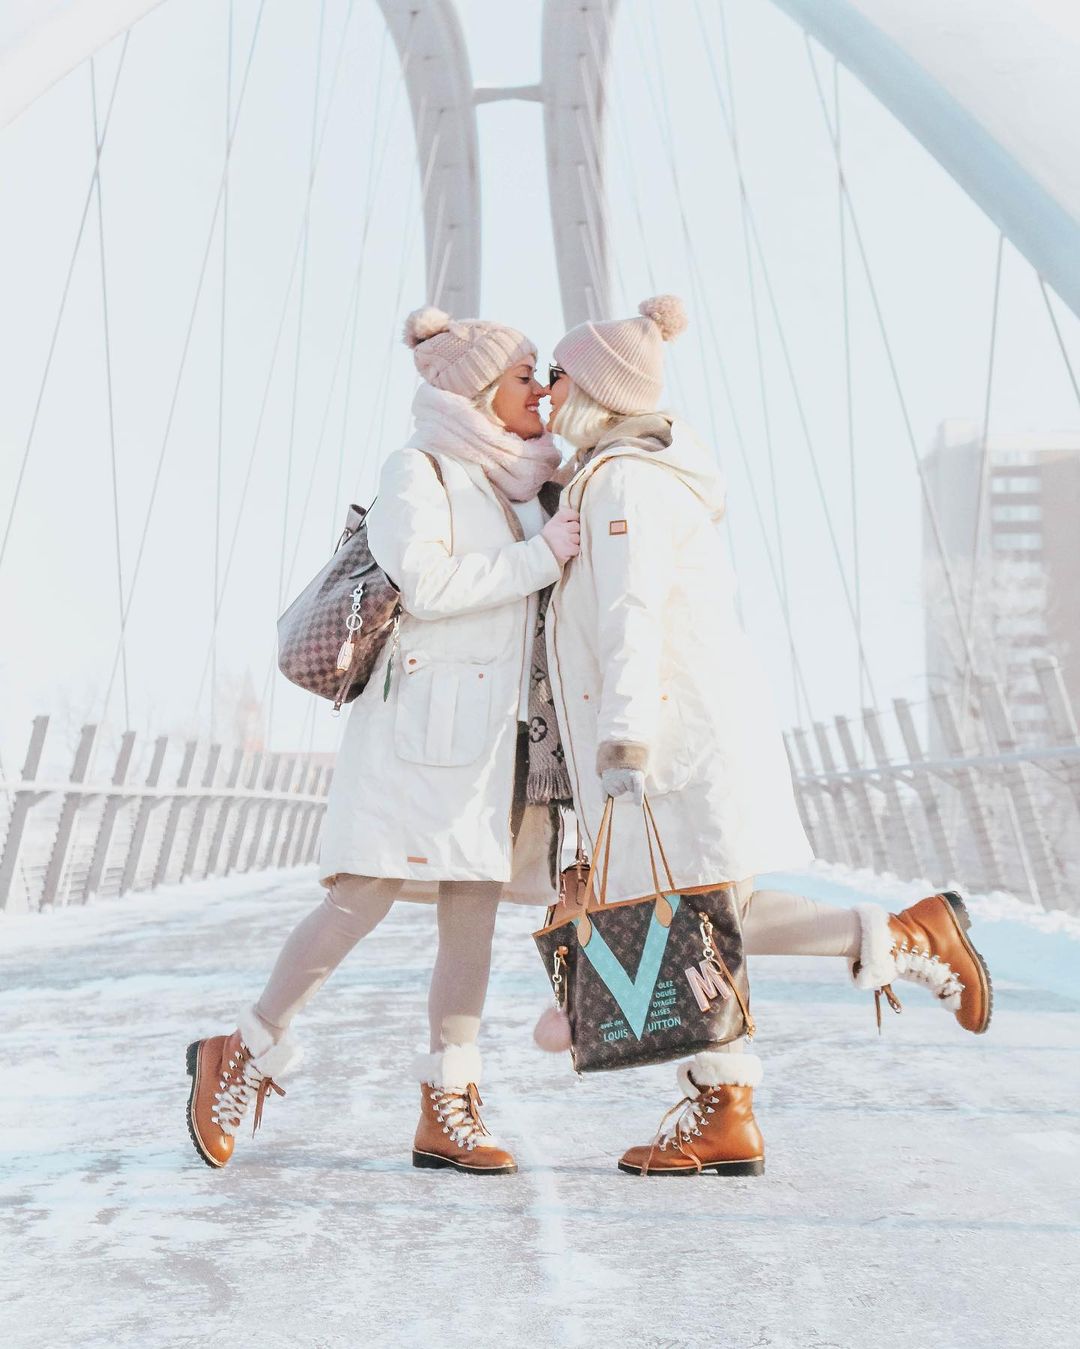 Pictured is two woman embracing each other on a bridge during winter. Photo by Instagram username @whatwegandidnext